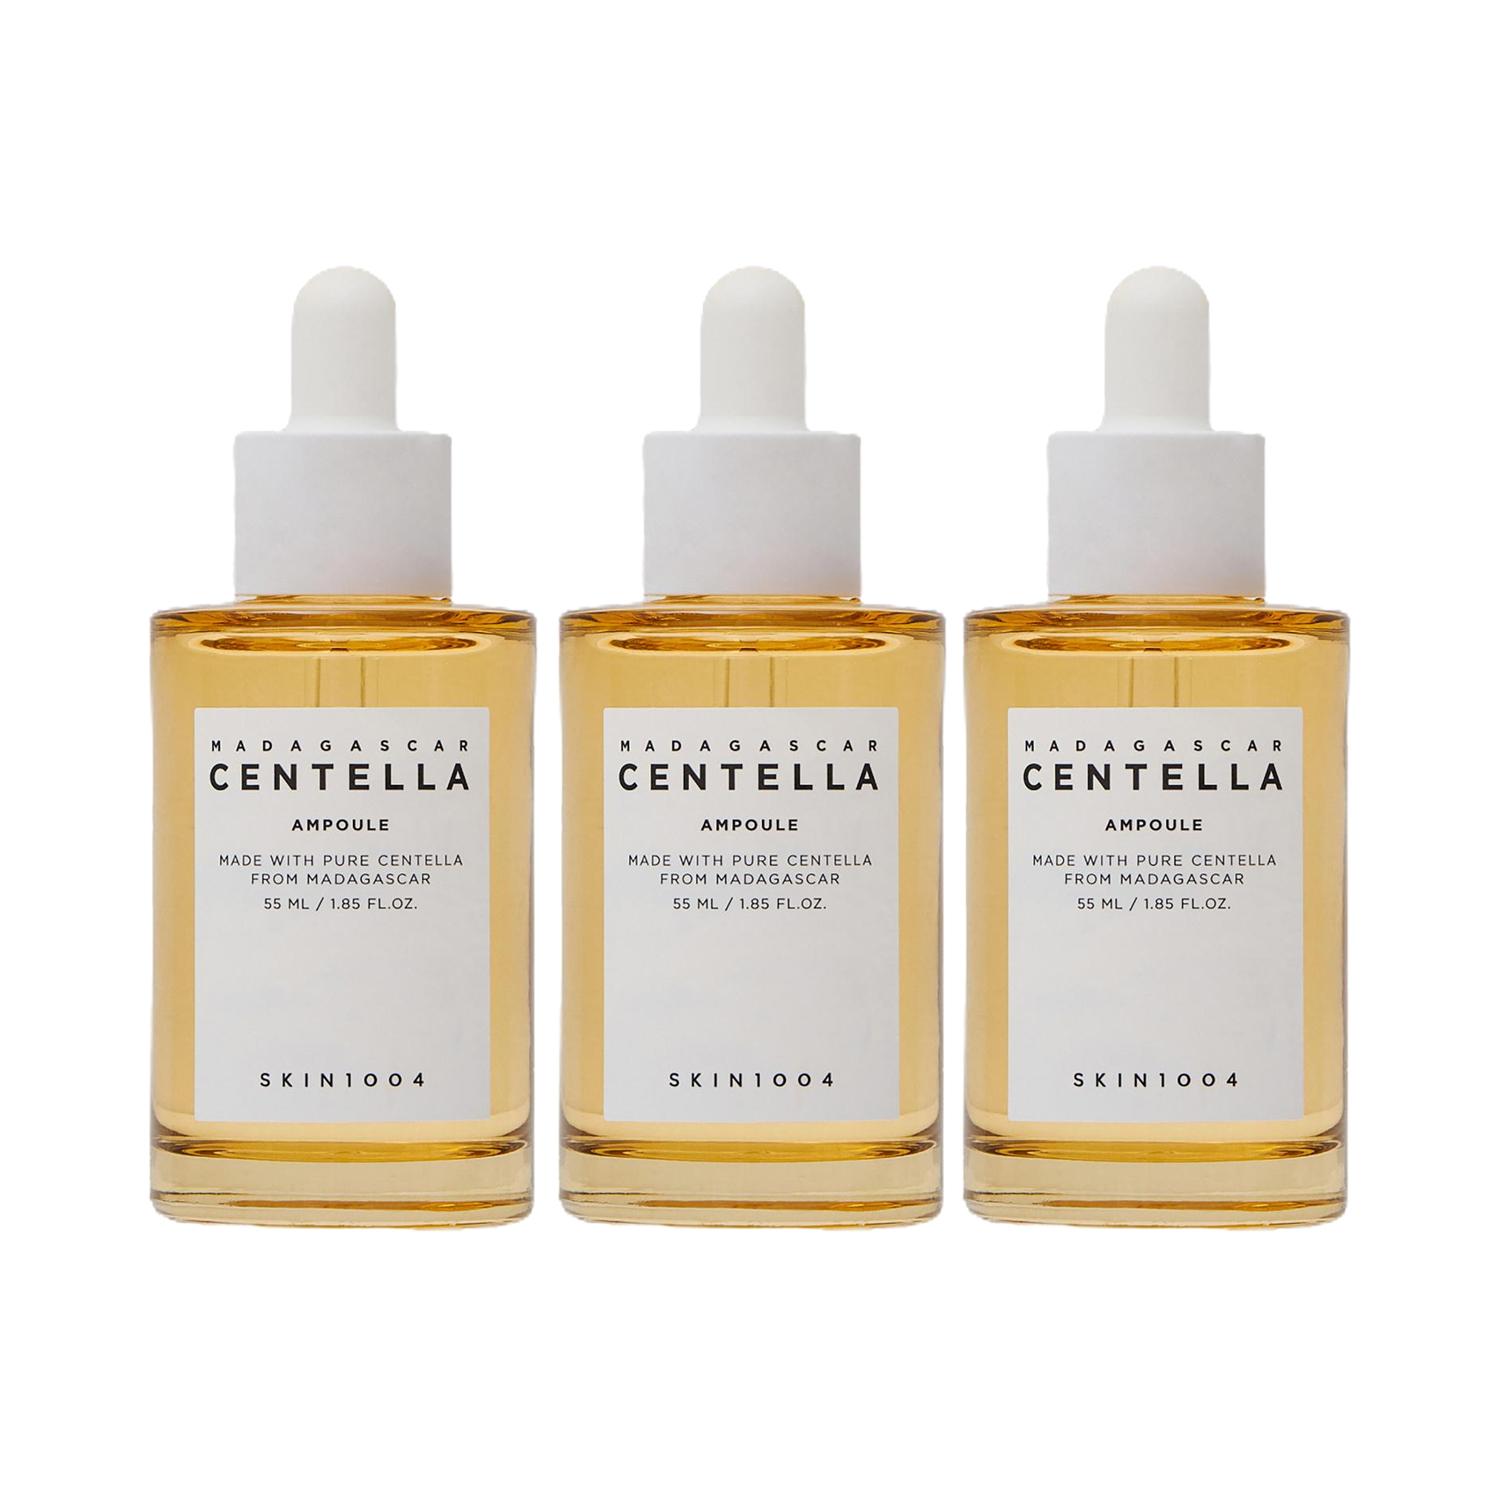 SKIN1004 | SKIN1004 Ampoule Pack of 3 Combo